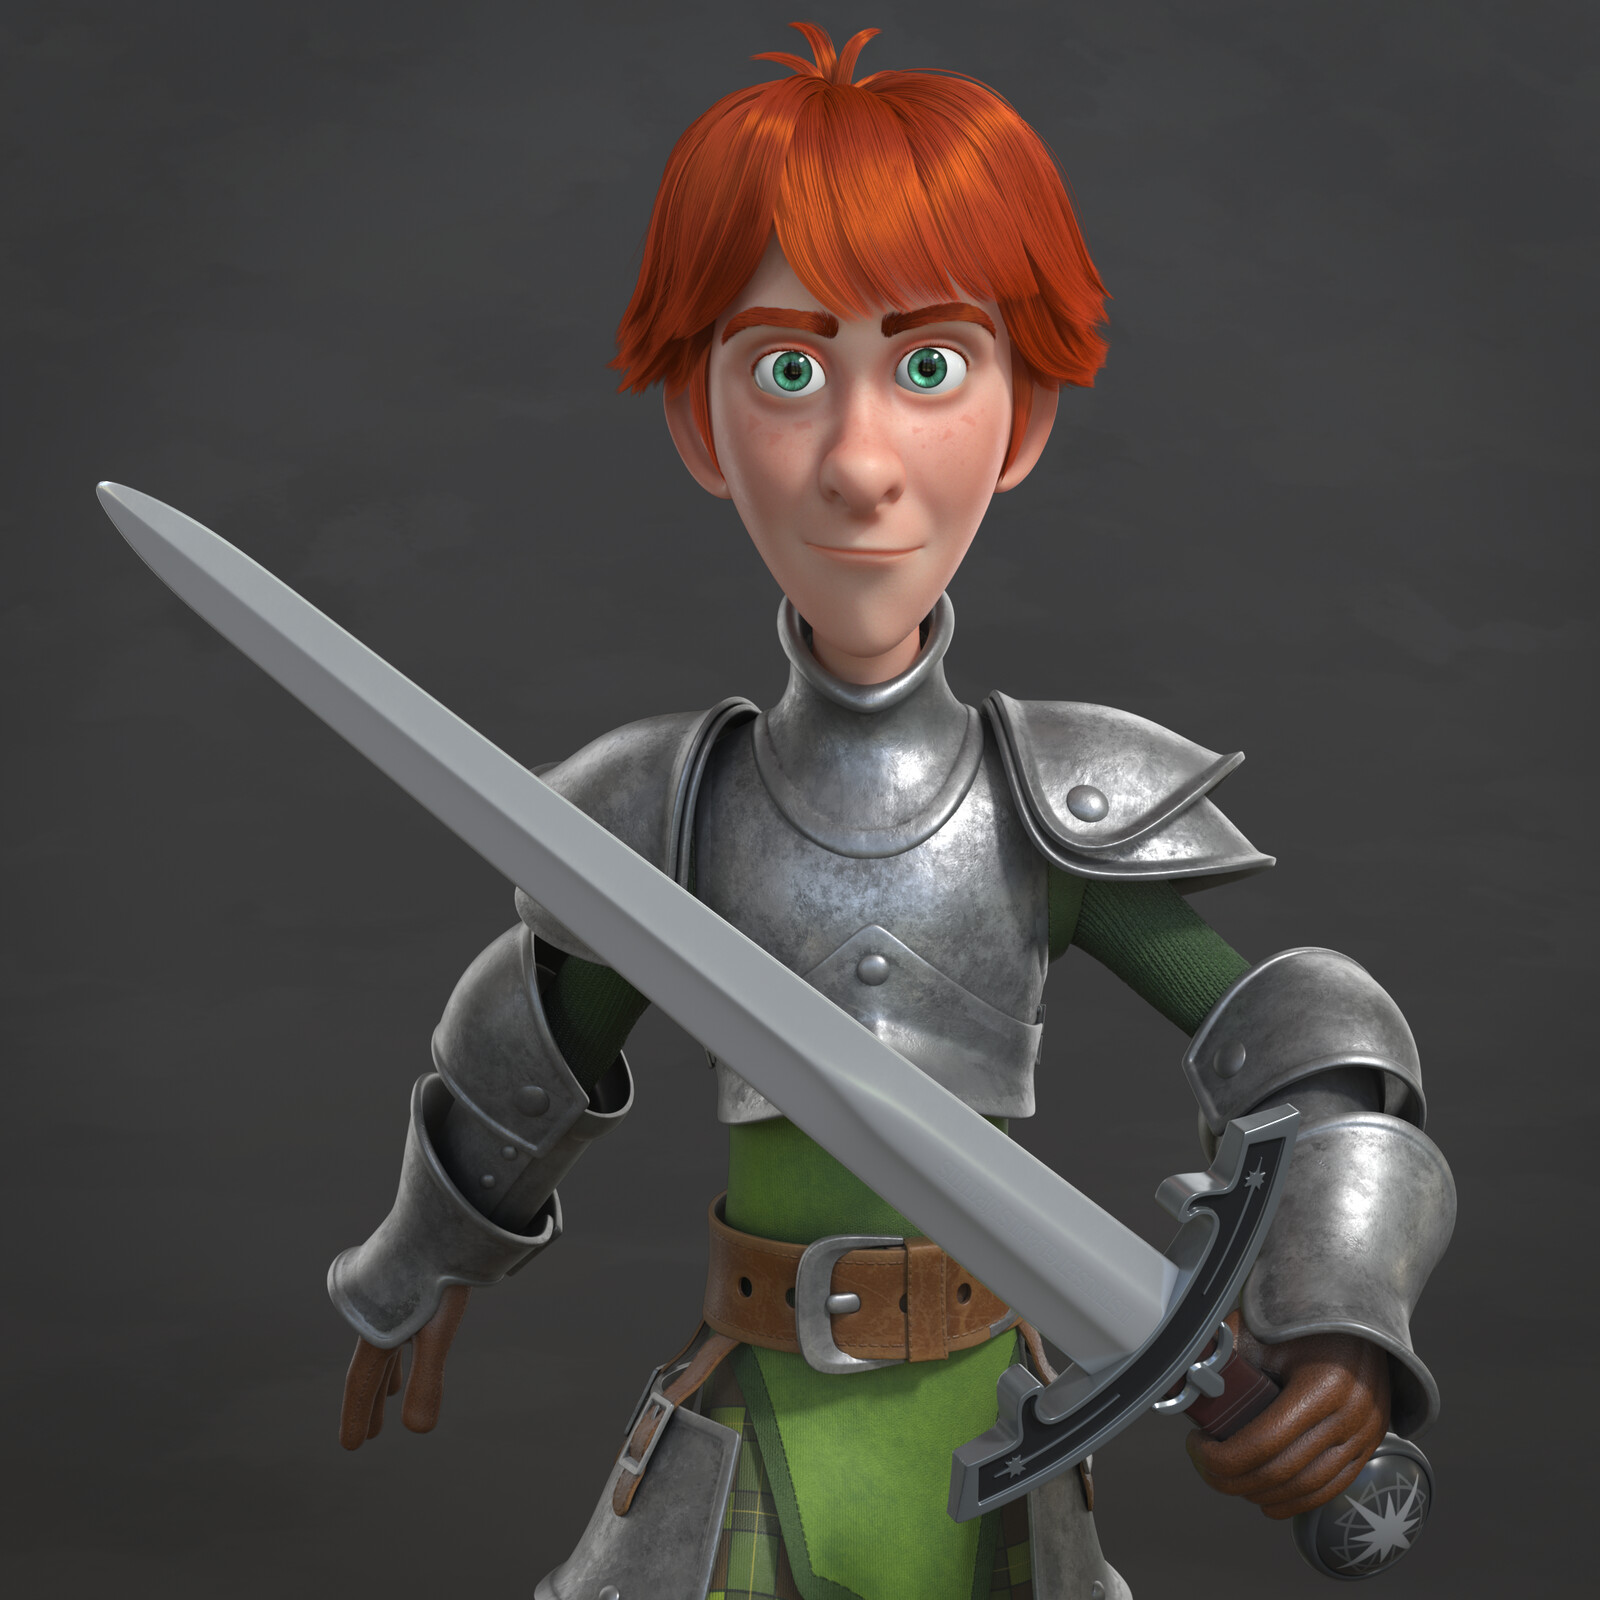 Justin (Character from 'Justin and the Knights of Valour')